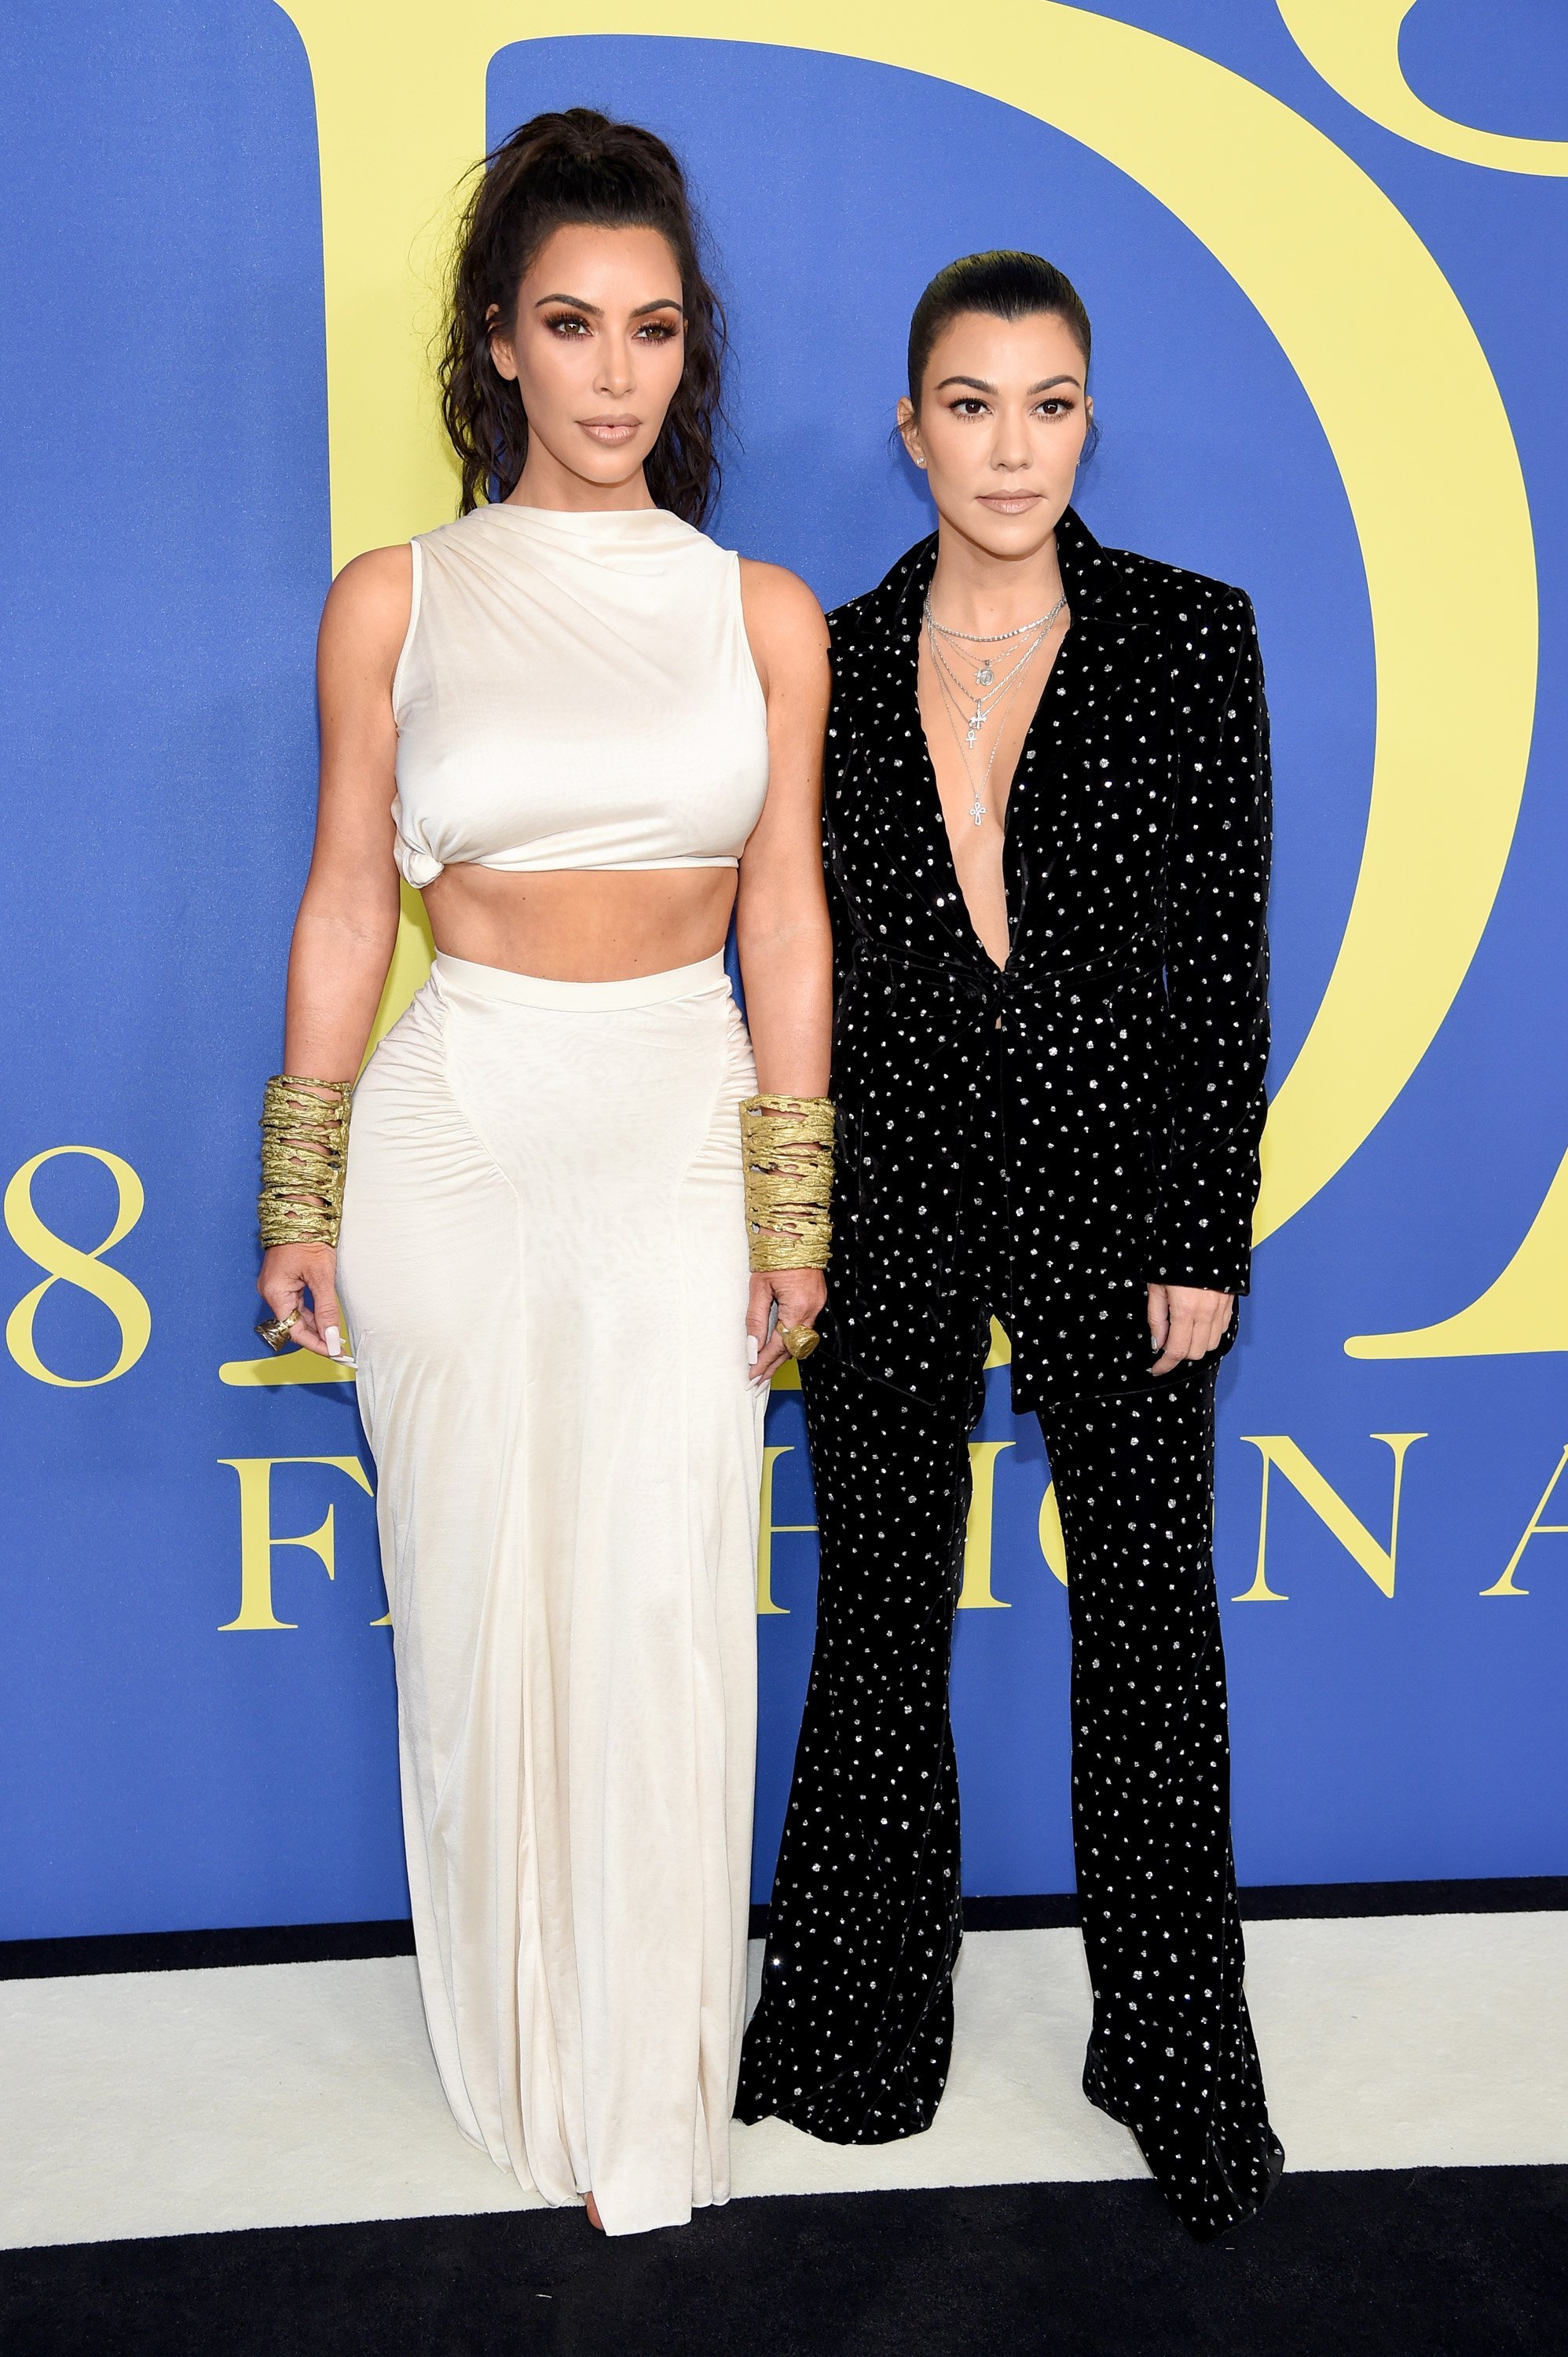 Kim Kardashian West and Kourtney Kardashian attend the 2018 CFDA Fashion Awards at Brooklyn Museum on June 4, 2018, in New York City. | Source: Getty Images.